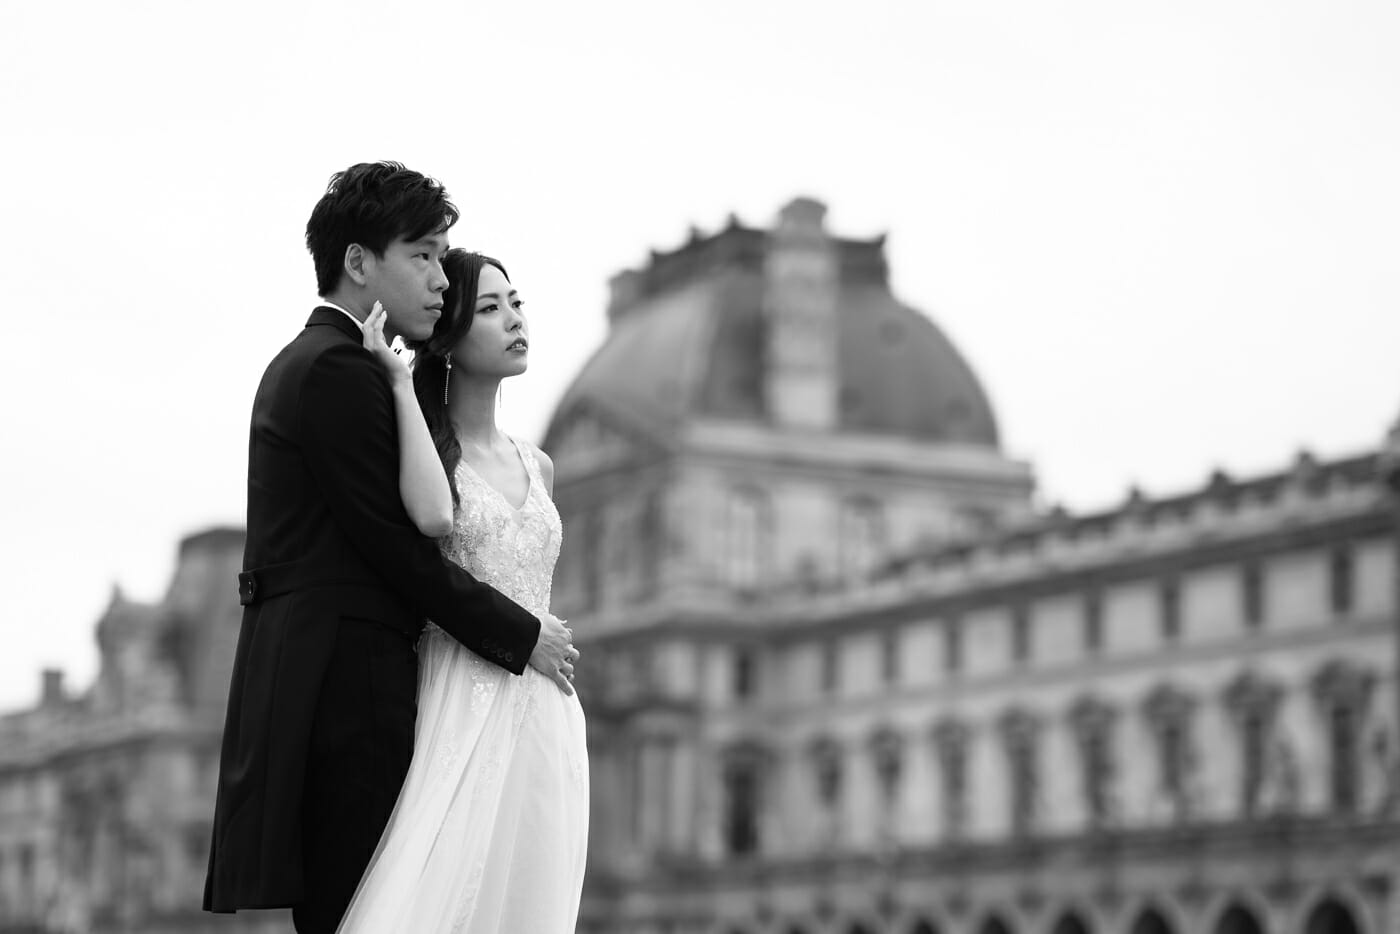 Romantic pre-wedding couple photoshoot pose at the Louvre Museum